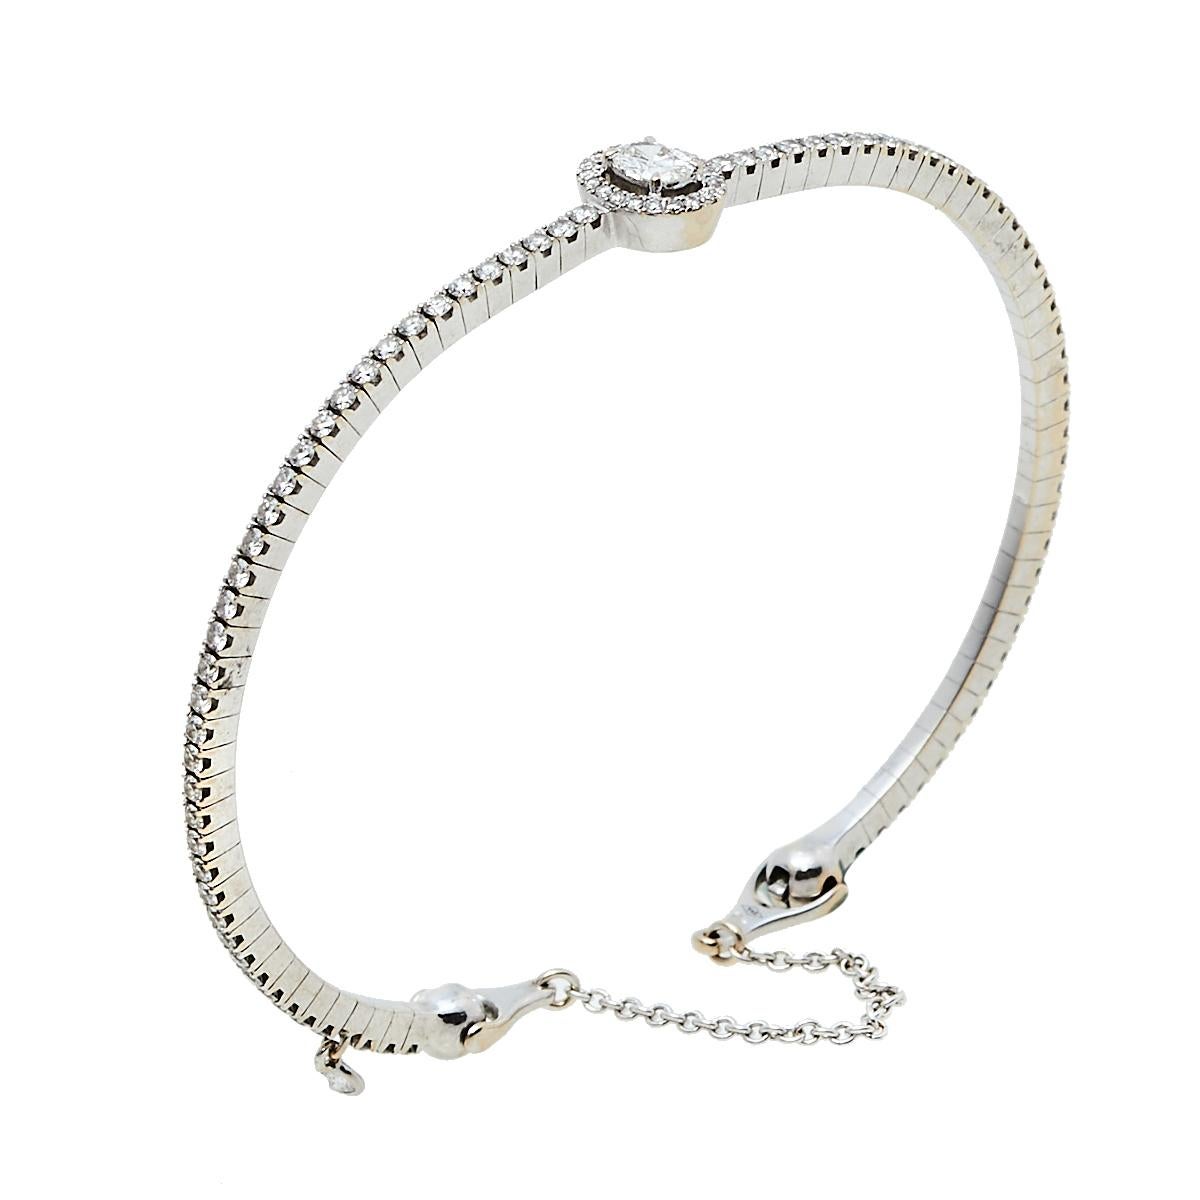 Precious diamonds that last forever. Messika's Glam'Azone collection gifts women priceless jewels that are glamourous, light, and wearable. This Glam'Azone bracelet has a single strand made from 18k white gold and set carefully with diamonds. The